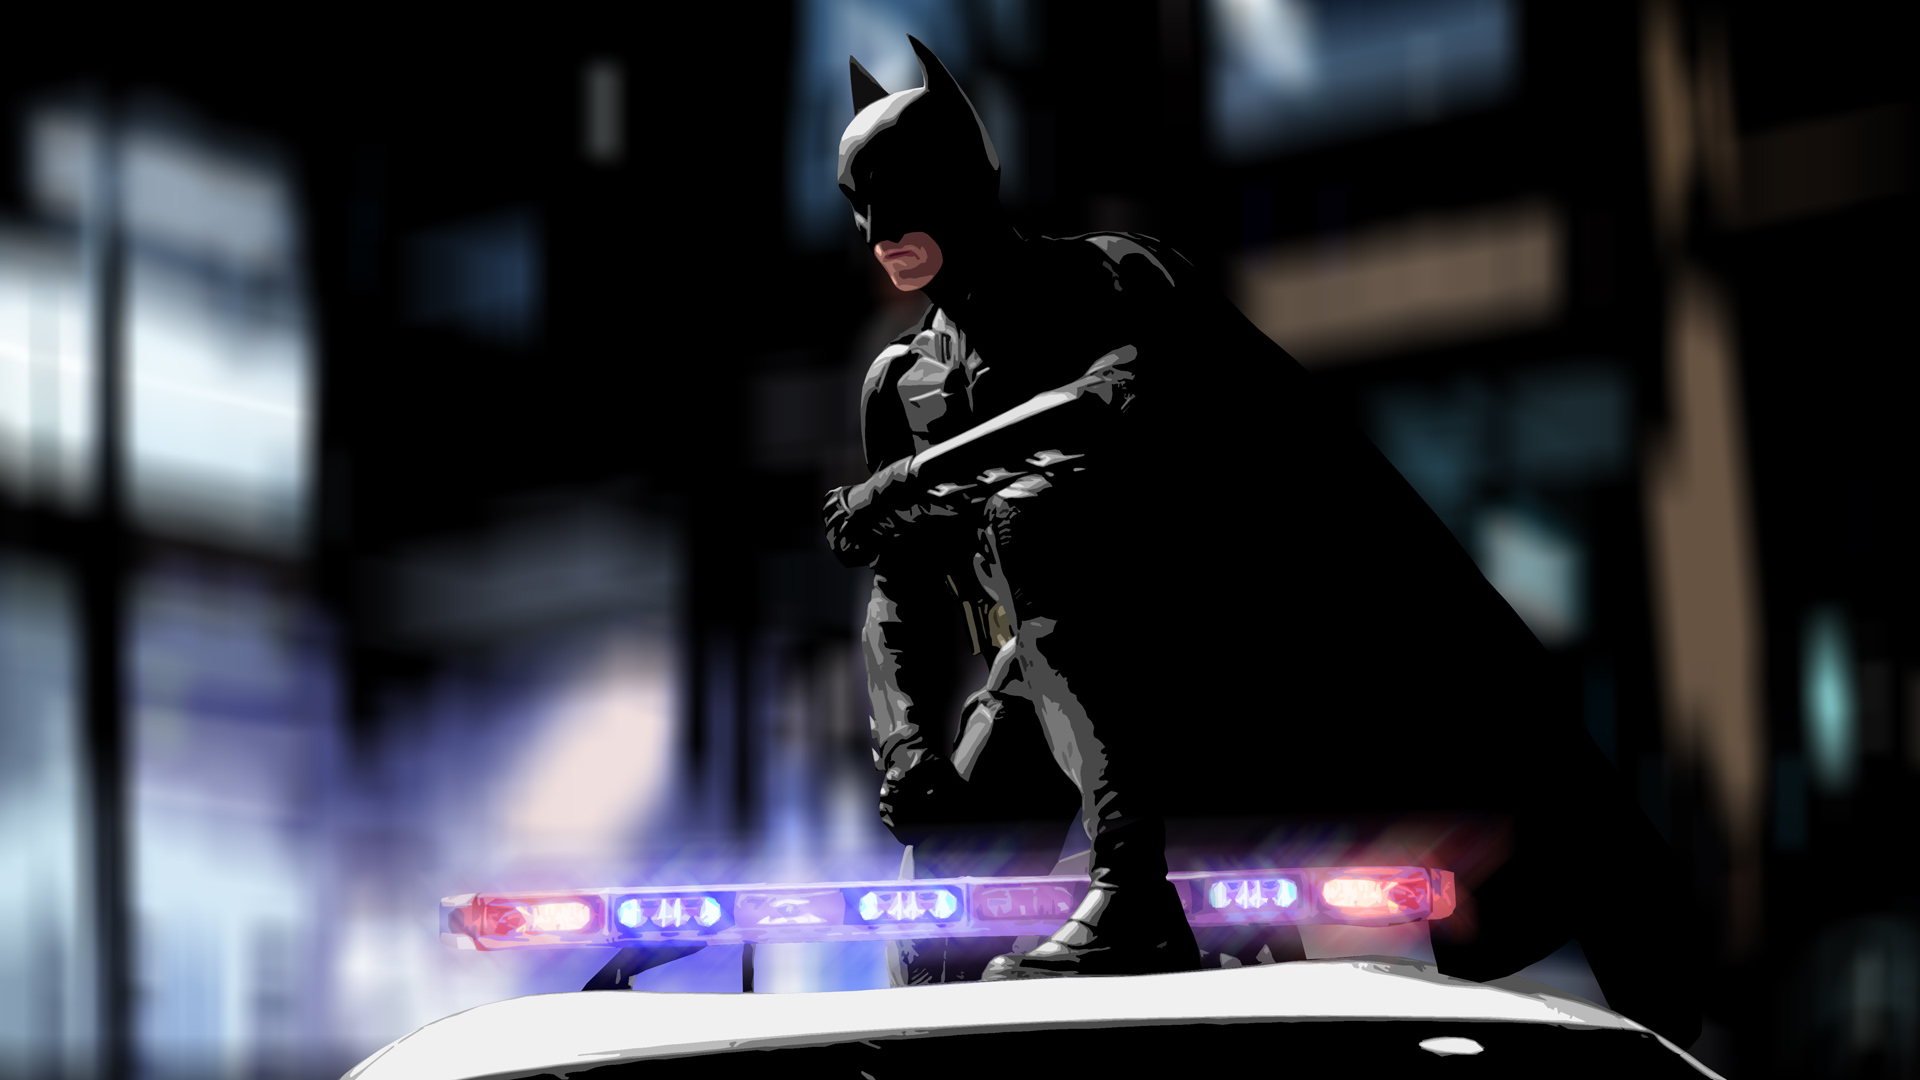 The Dark Knight download the new for windows